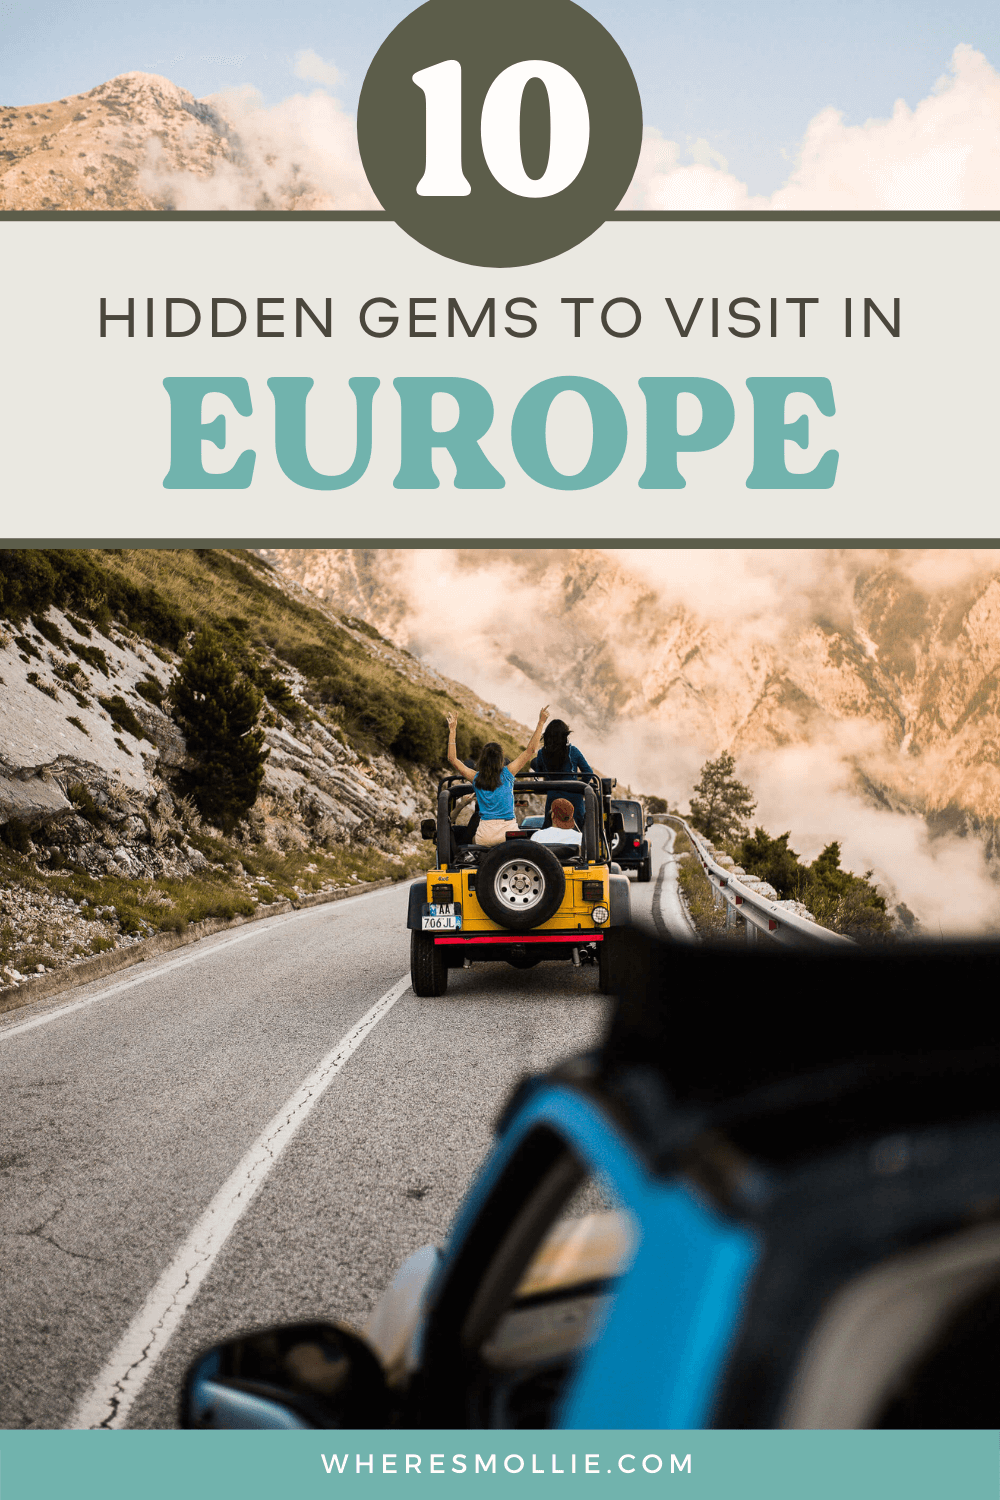 Unusual places to visit in Europe - hidden gems in Europe - unique places to visit in Europe - Where's Mollie